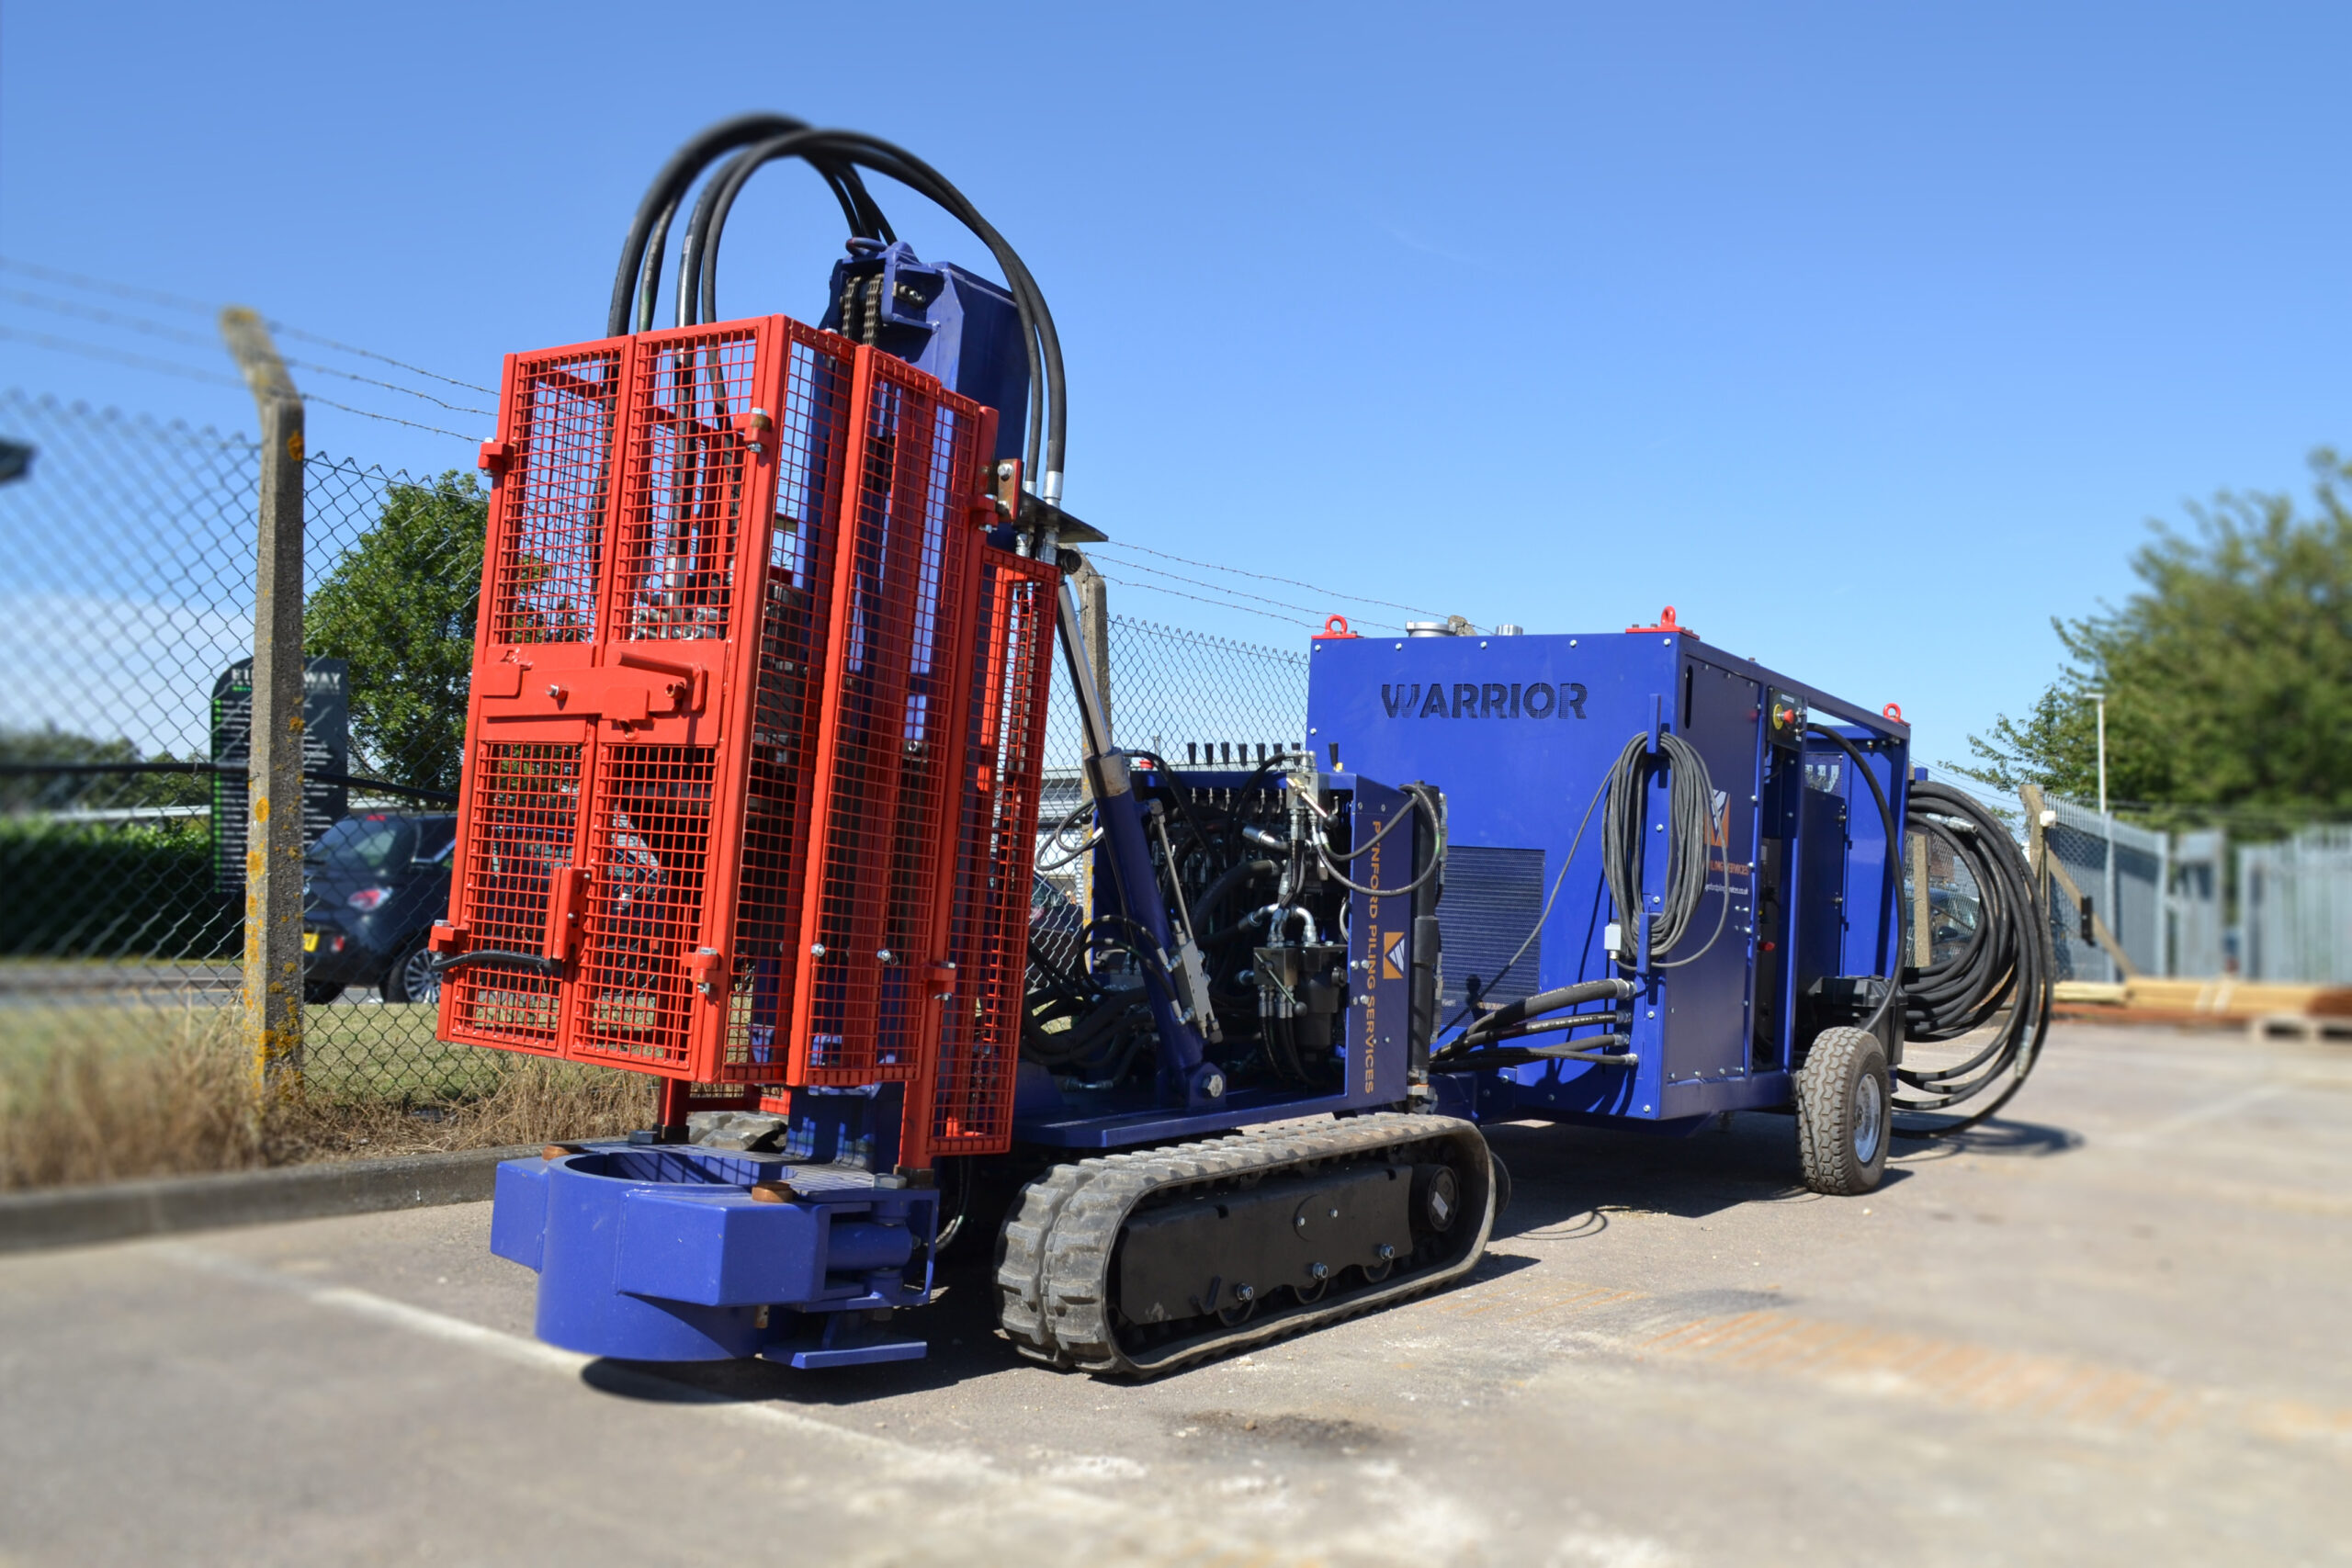 New – The best mini piling rig on the market